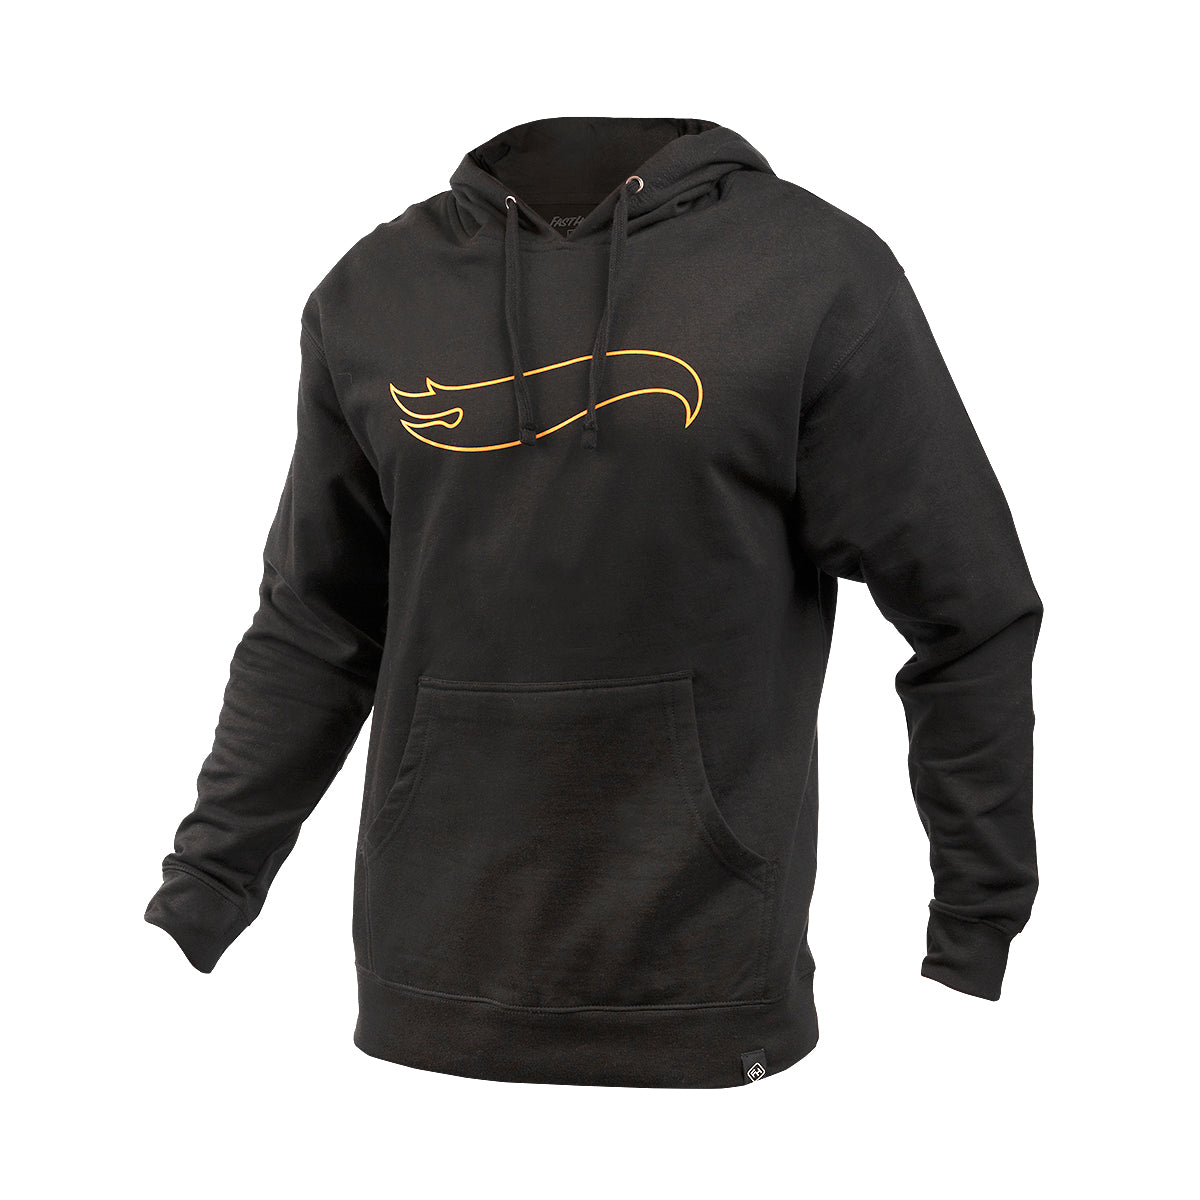 Hot Wheels Synergy Youth Hooded Pullover - Black